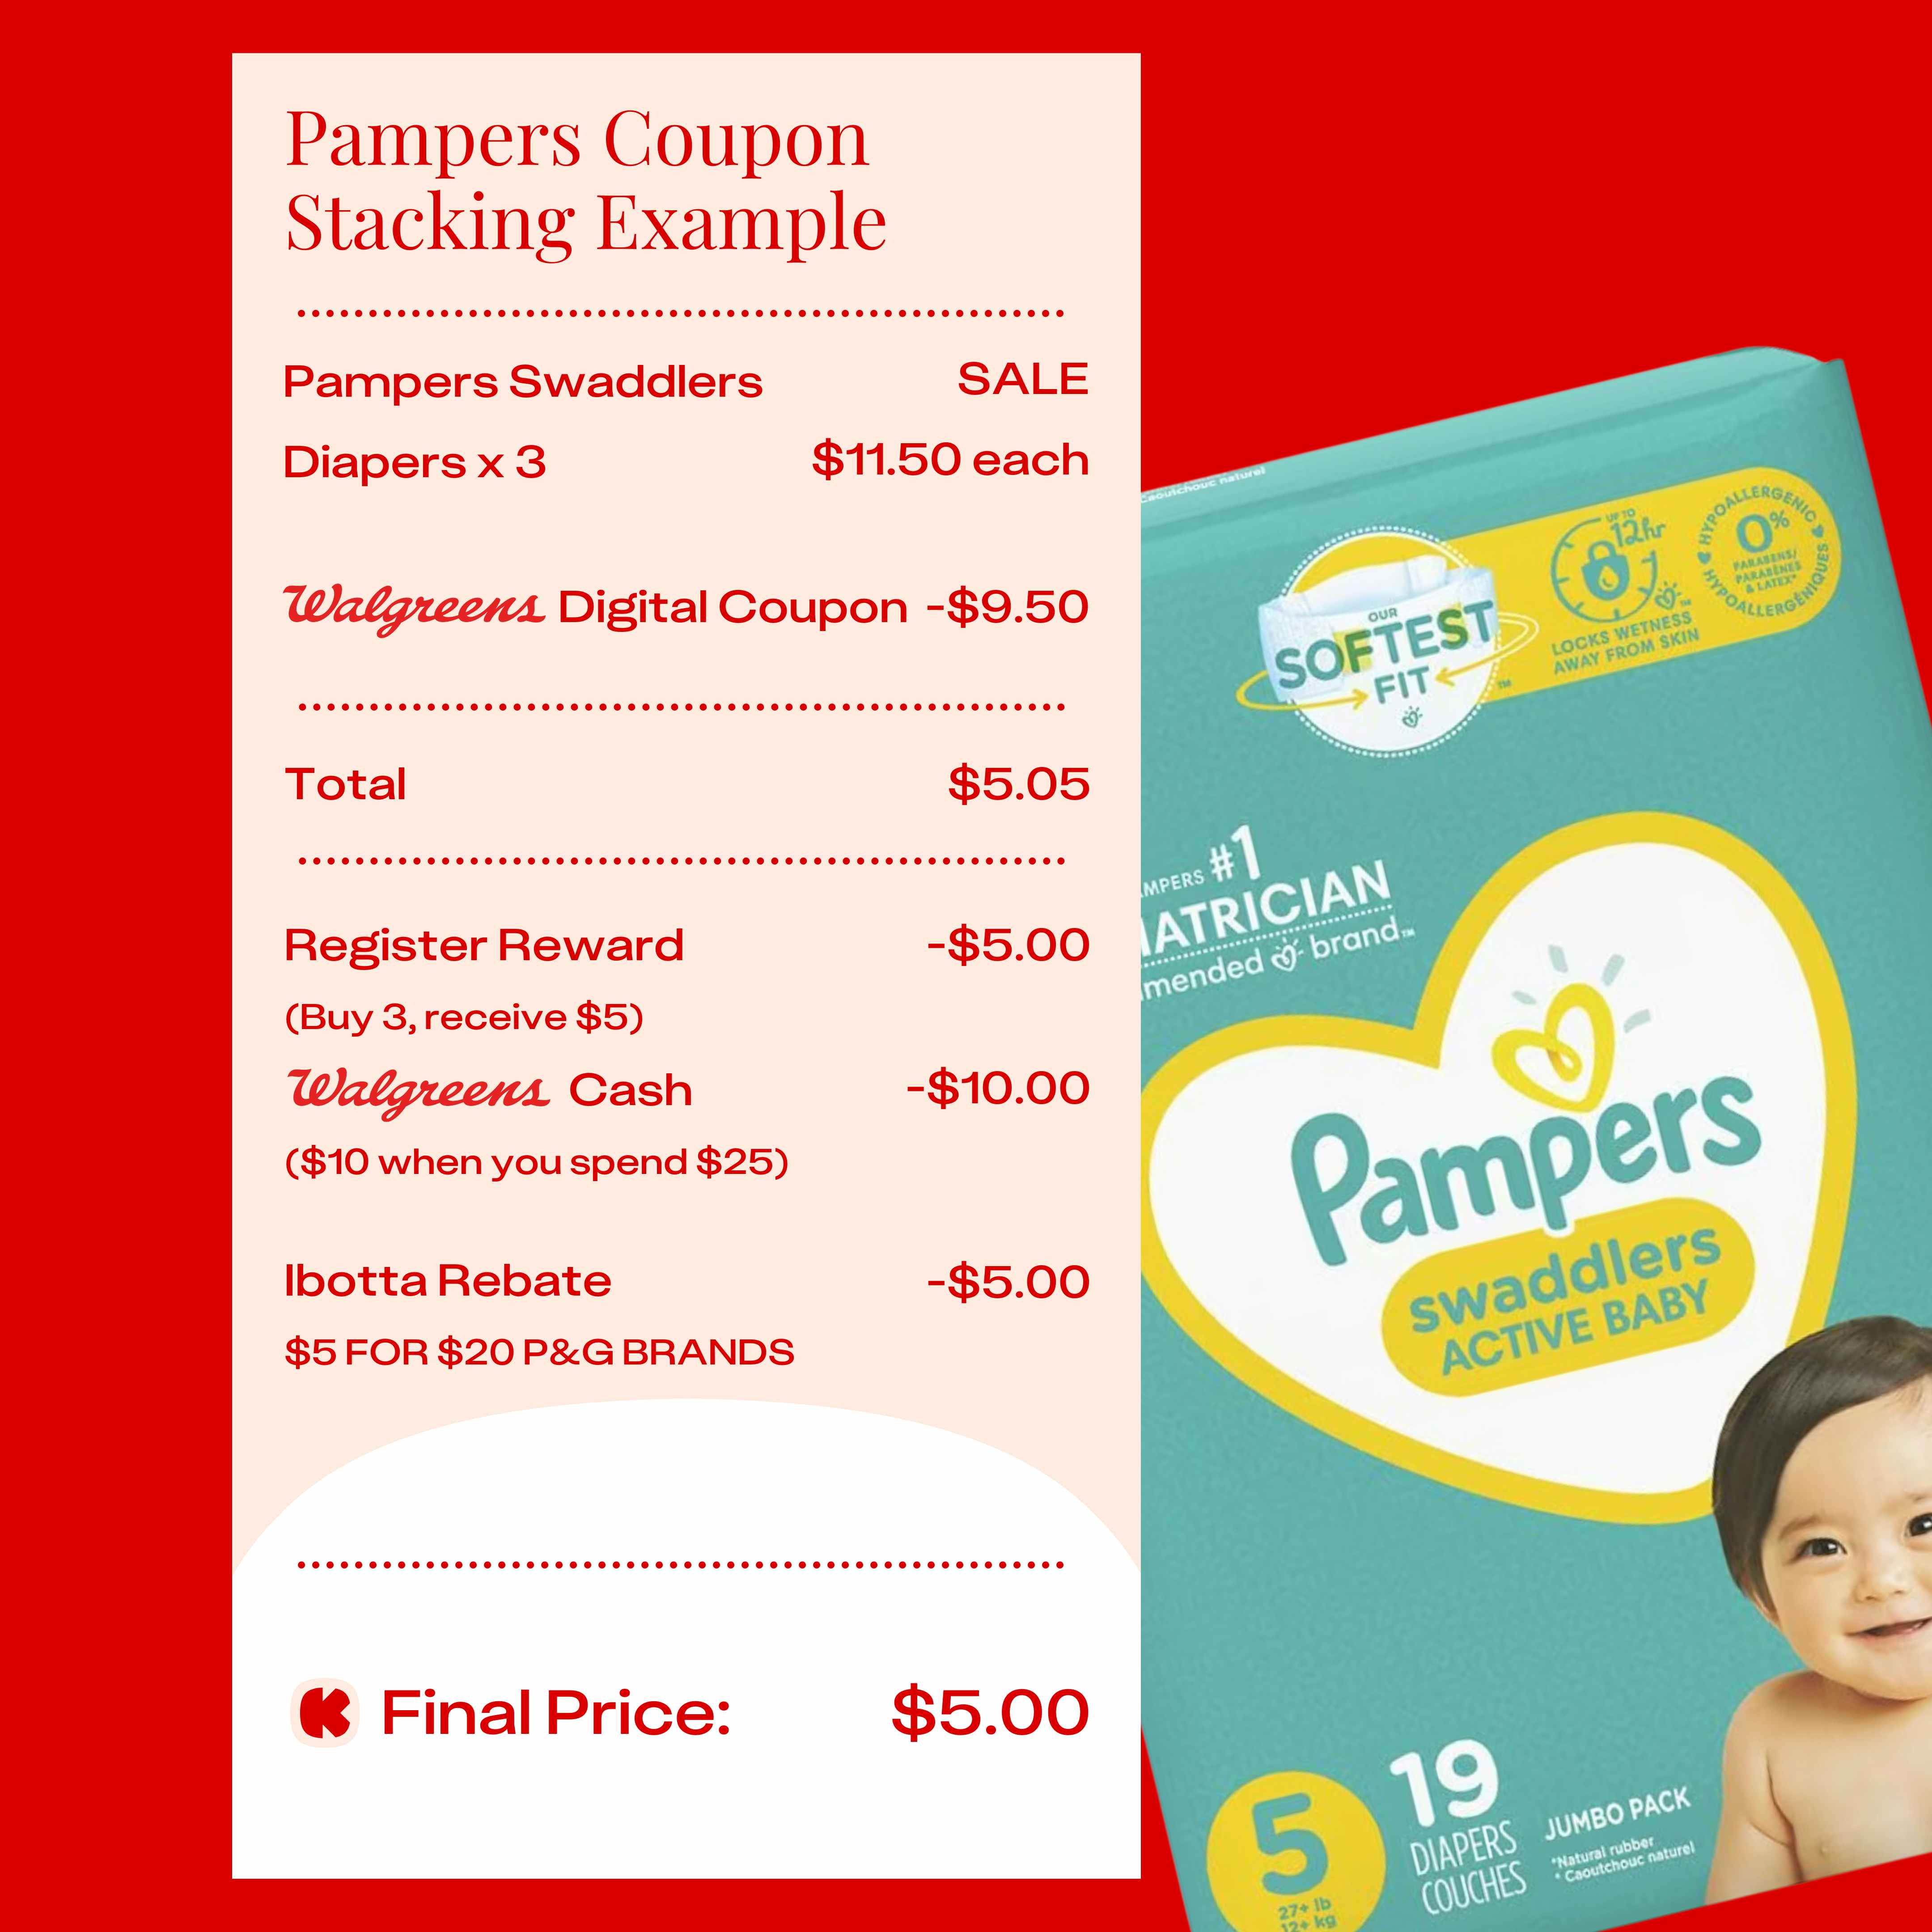 a coupon stacking example for pampers at walgreens